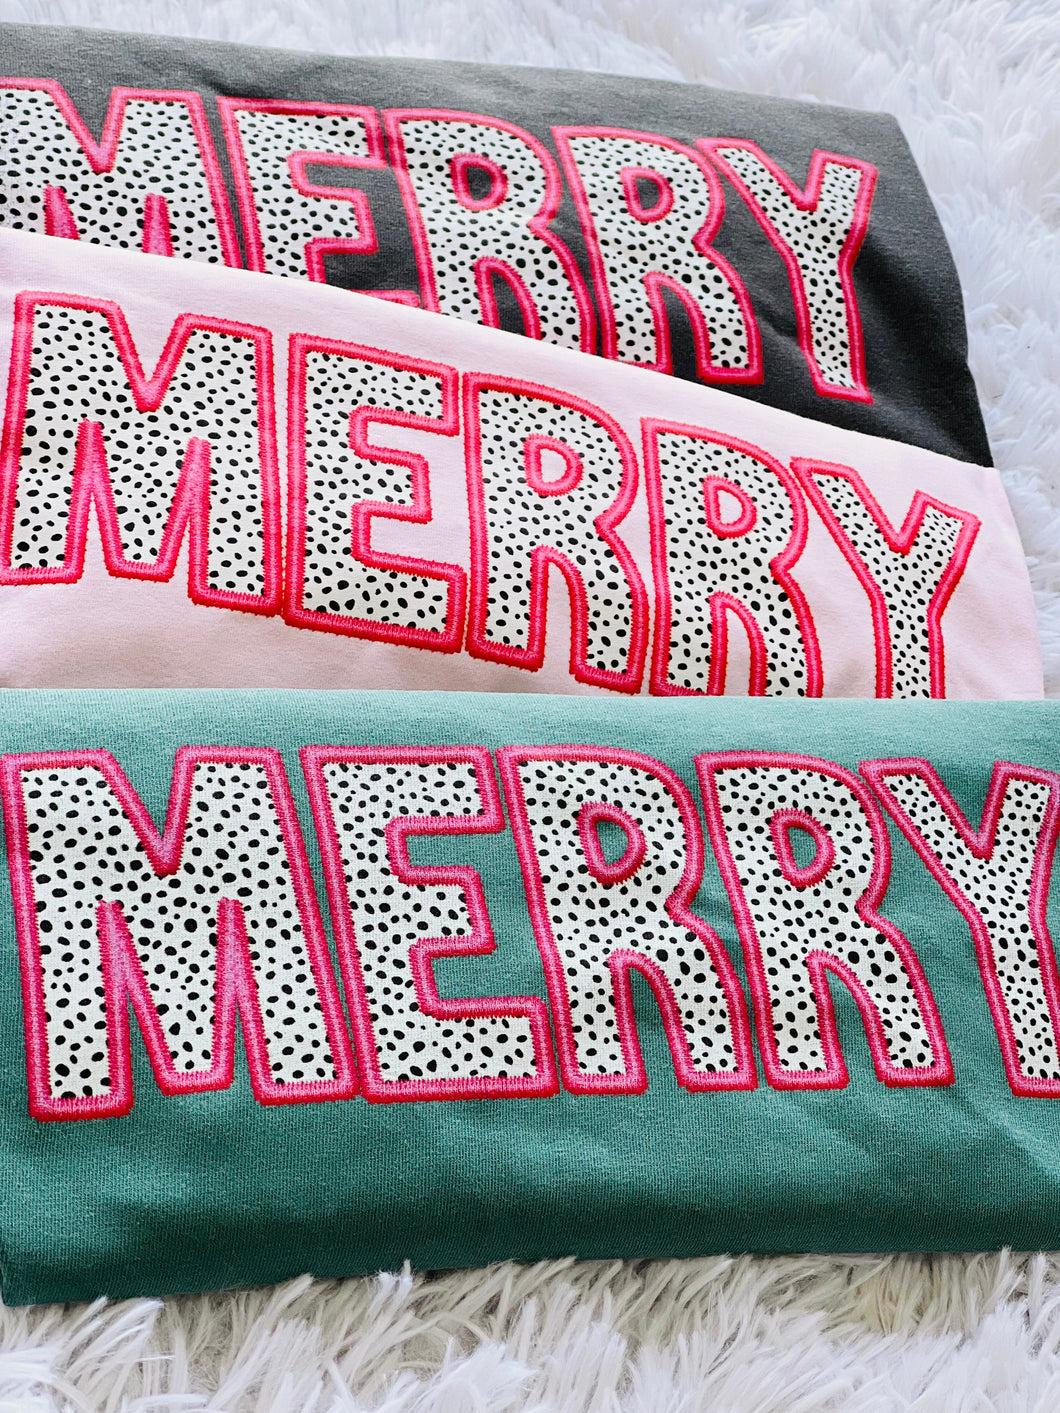 Faux Embroidery Merry Dot Tee PREORDER (SHIP DATE 11/23)